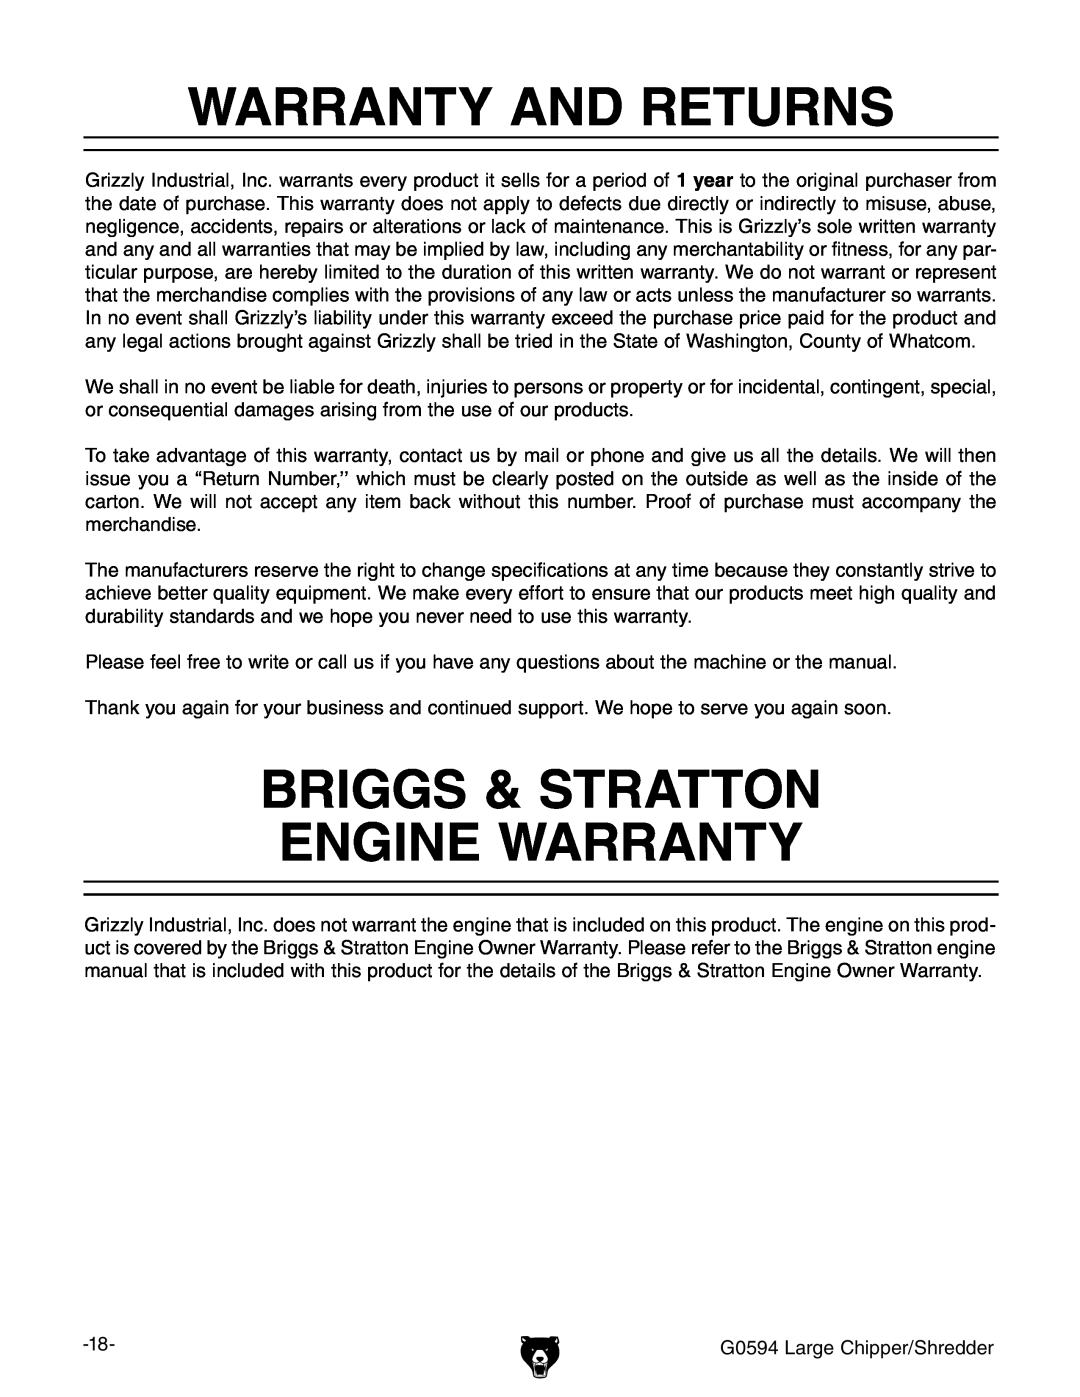 Grizzly G0594 owner manual Warranty And Returns, Briggs & Stratton Engine Warranty 